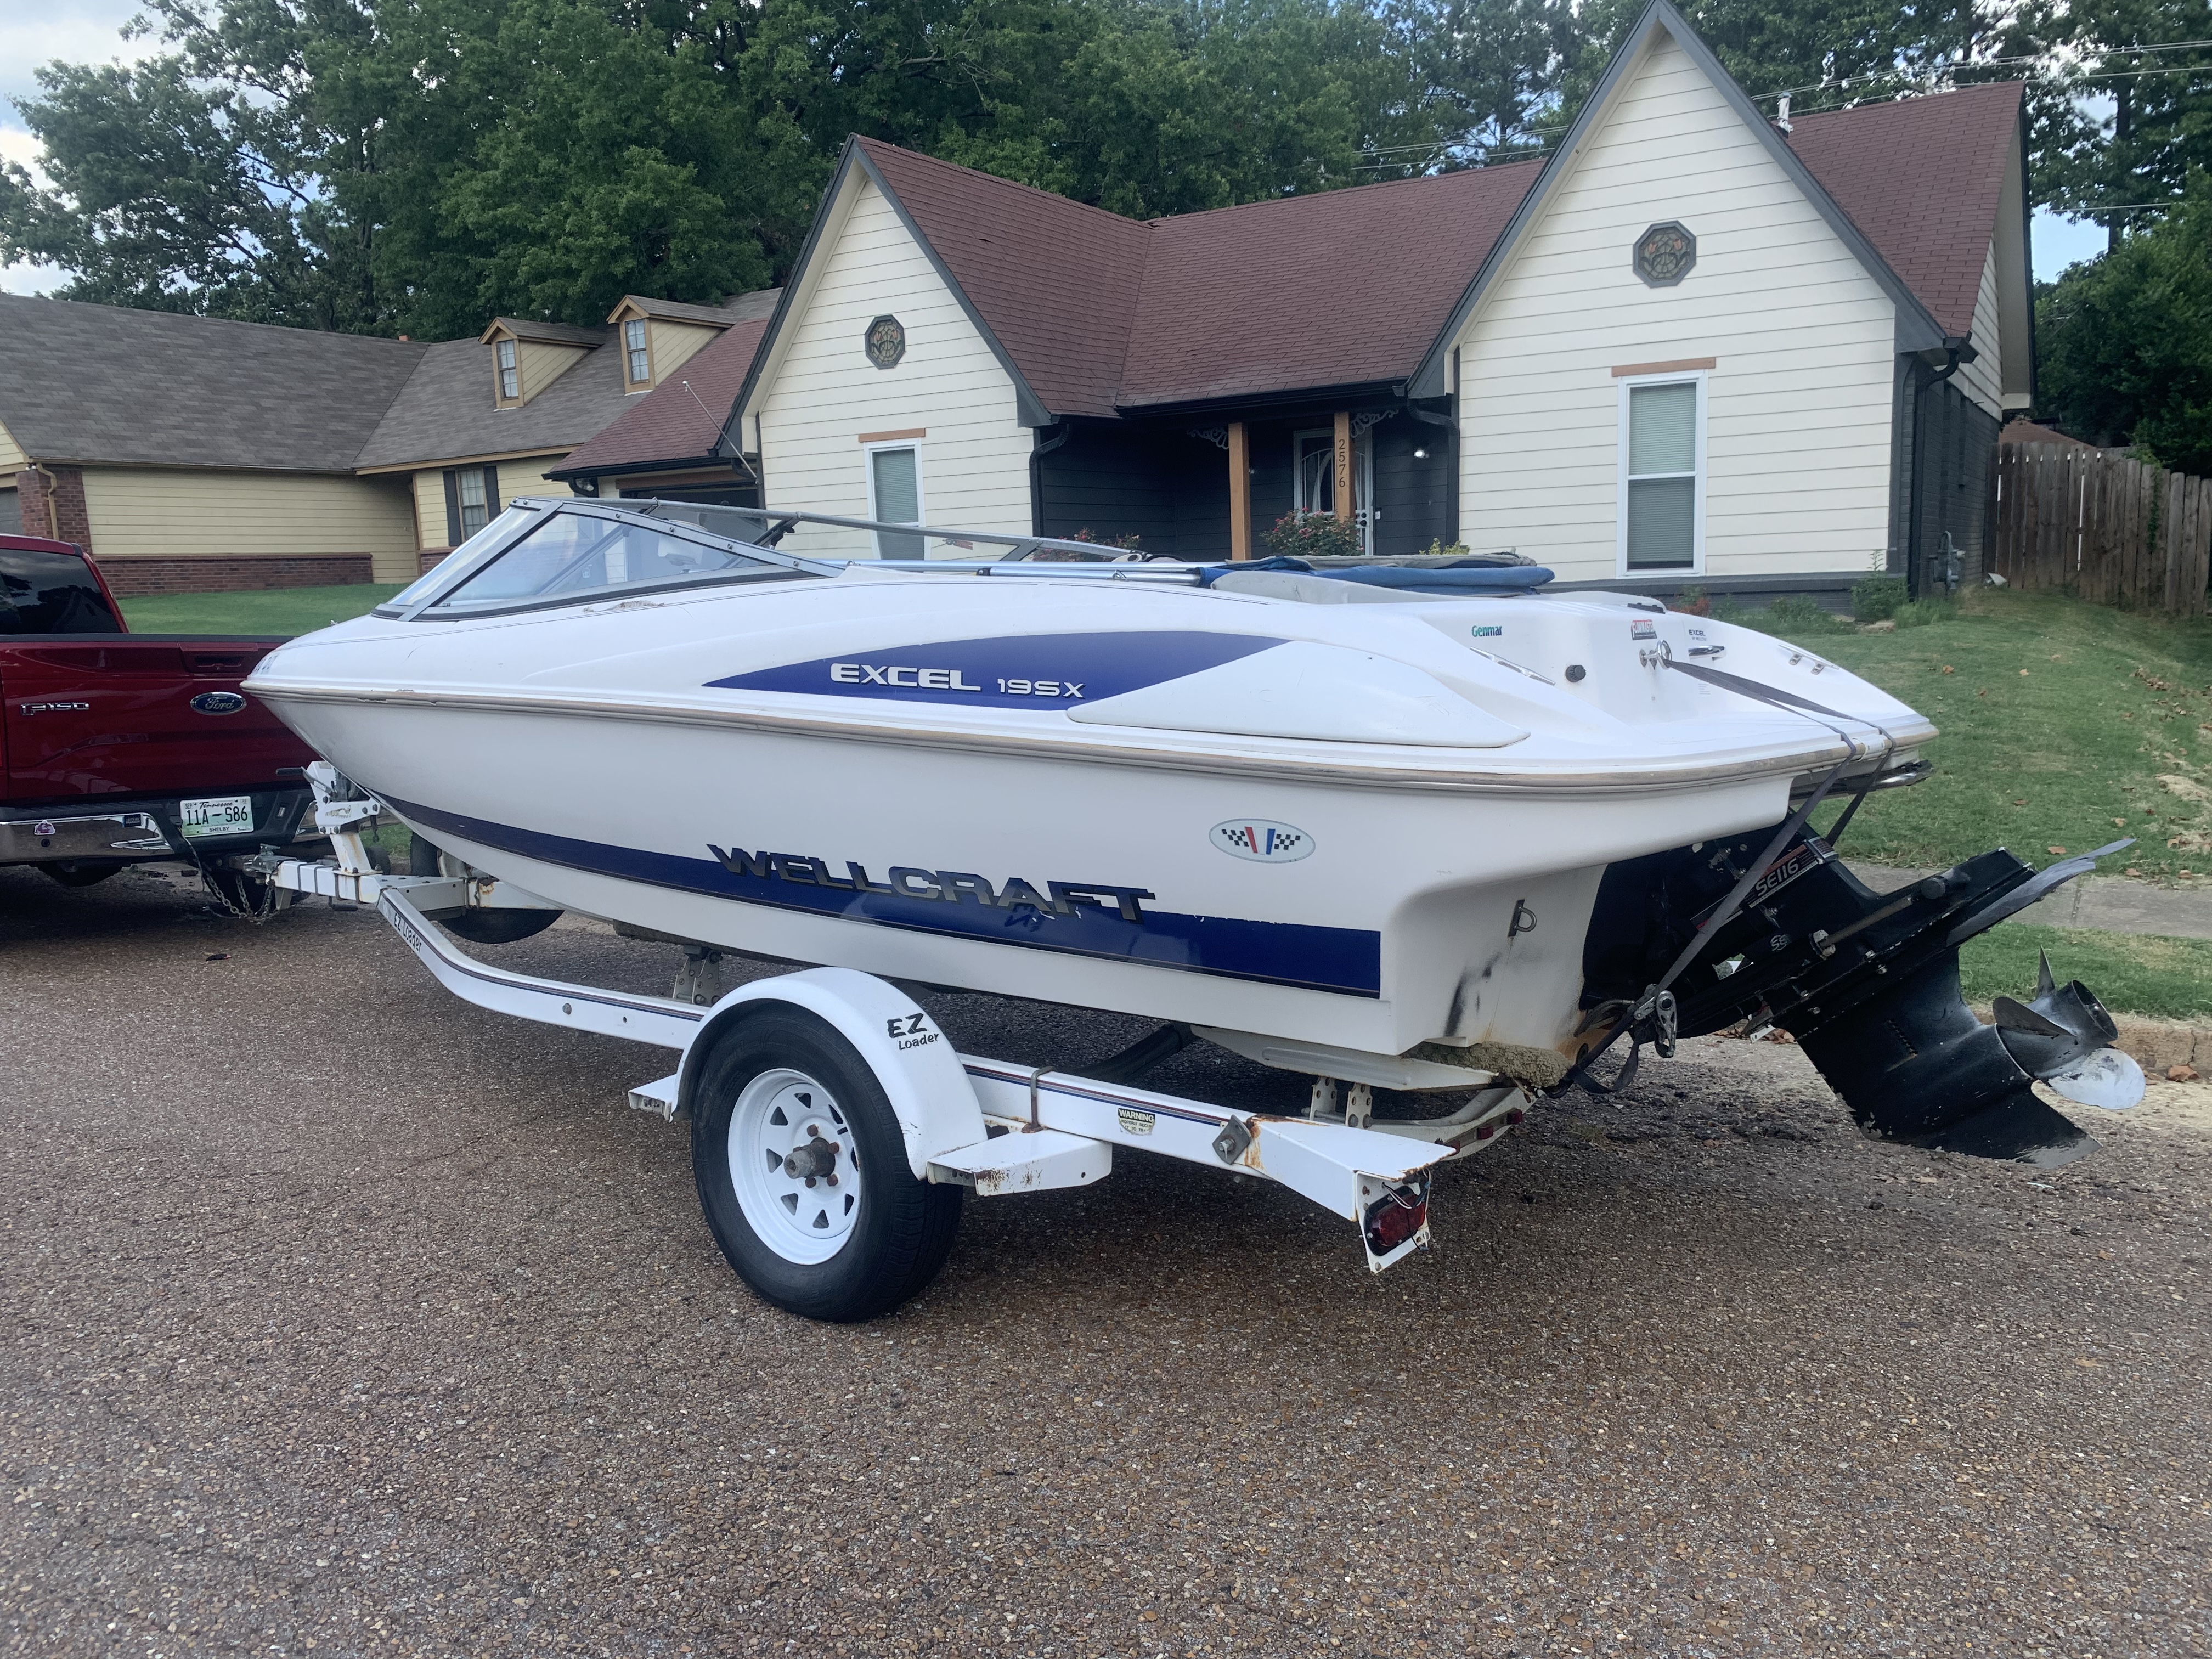 1996 Wellcraft Excel 19sx  Power boat for sale in Bartlett, TN - image 6 